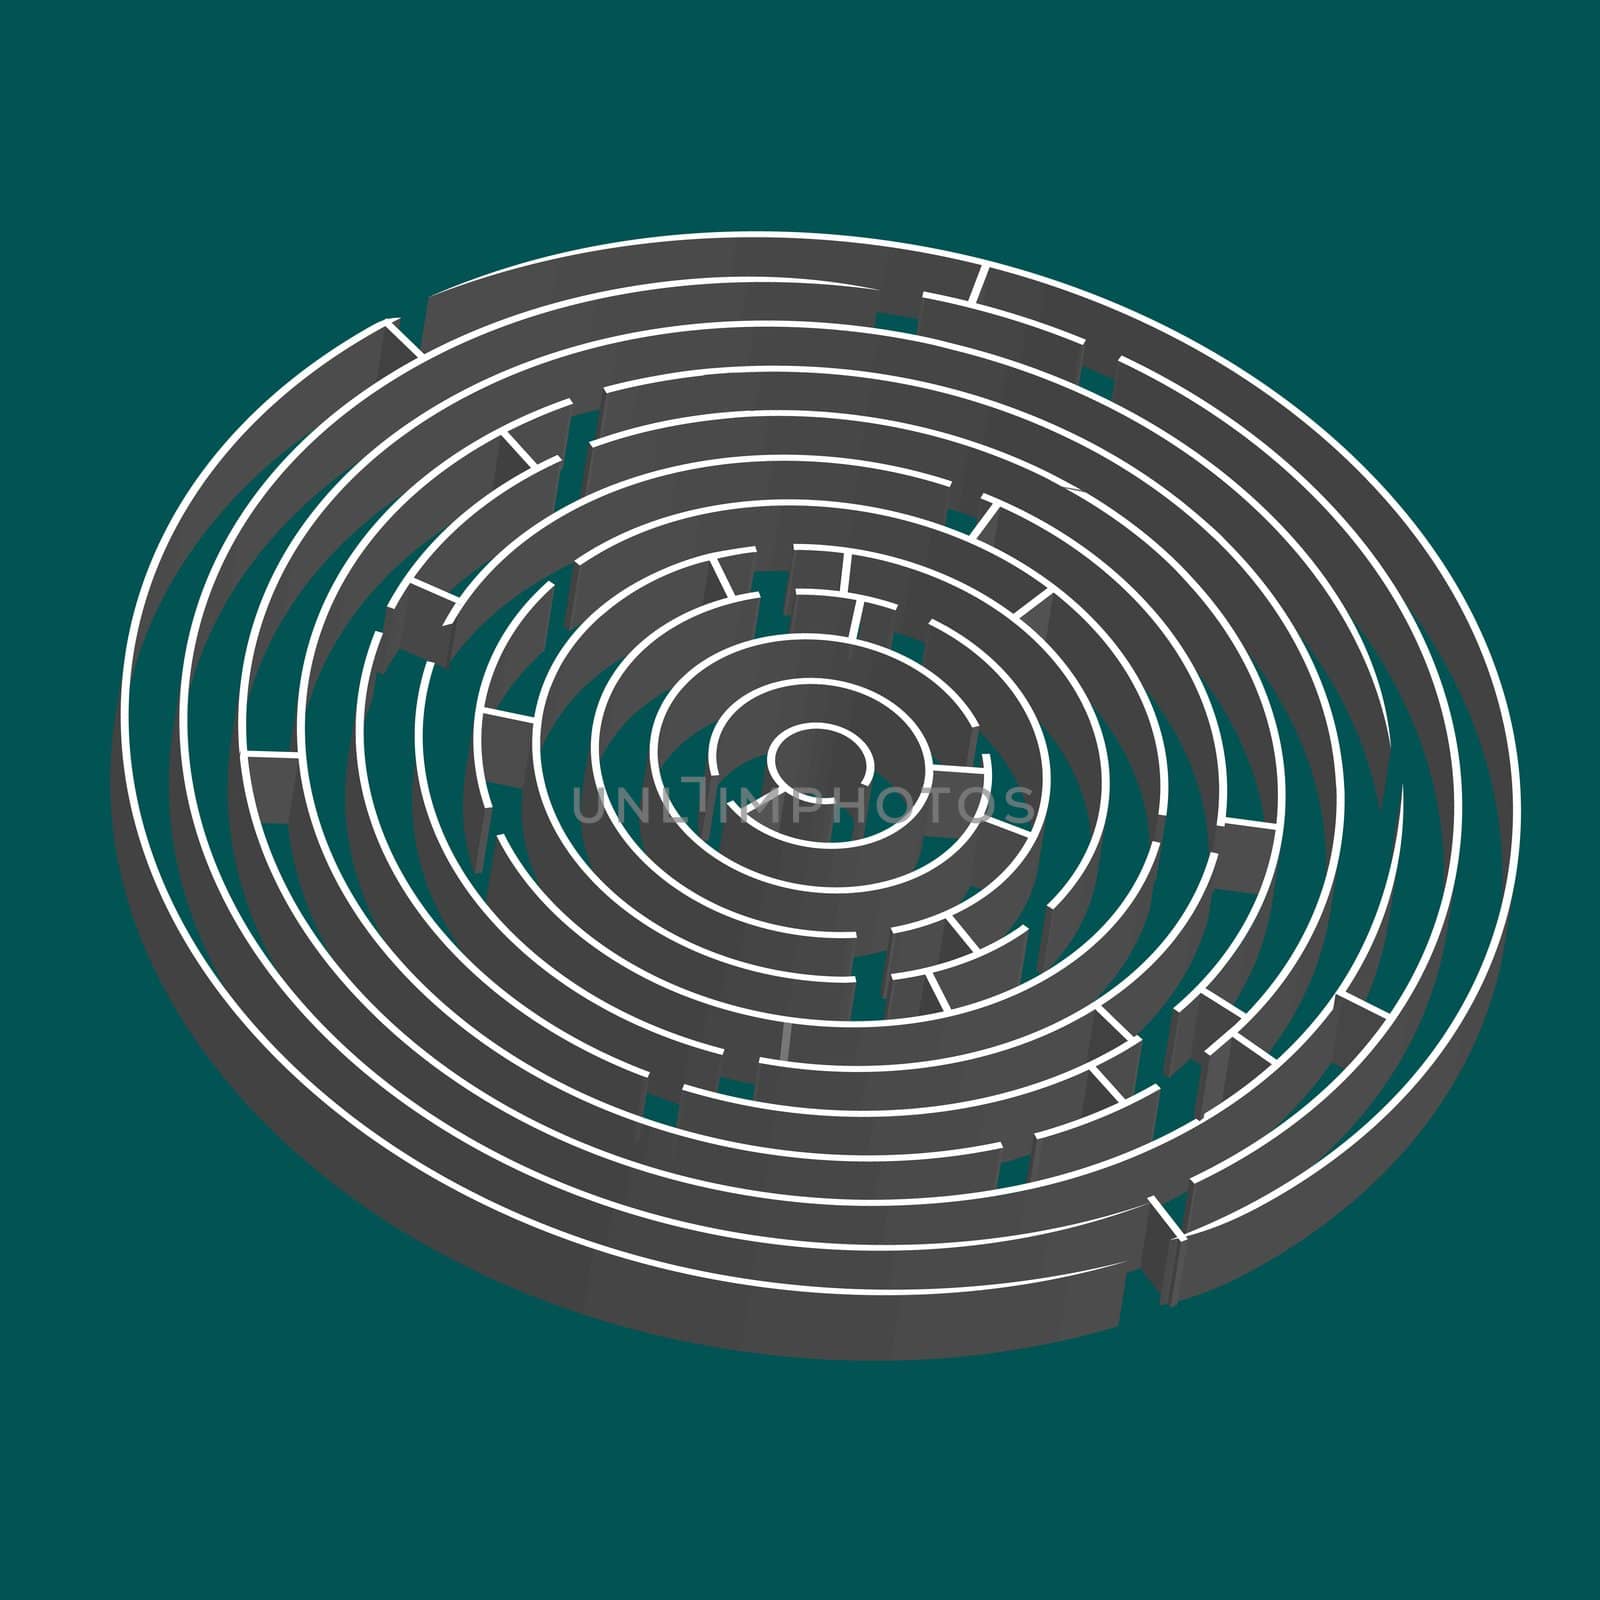 tridimensional round maze, vector art illustration; easy to change colors